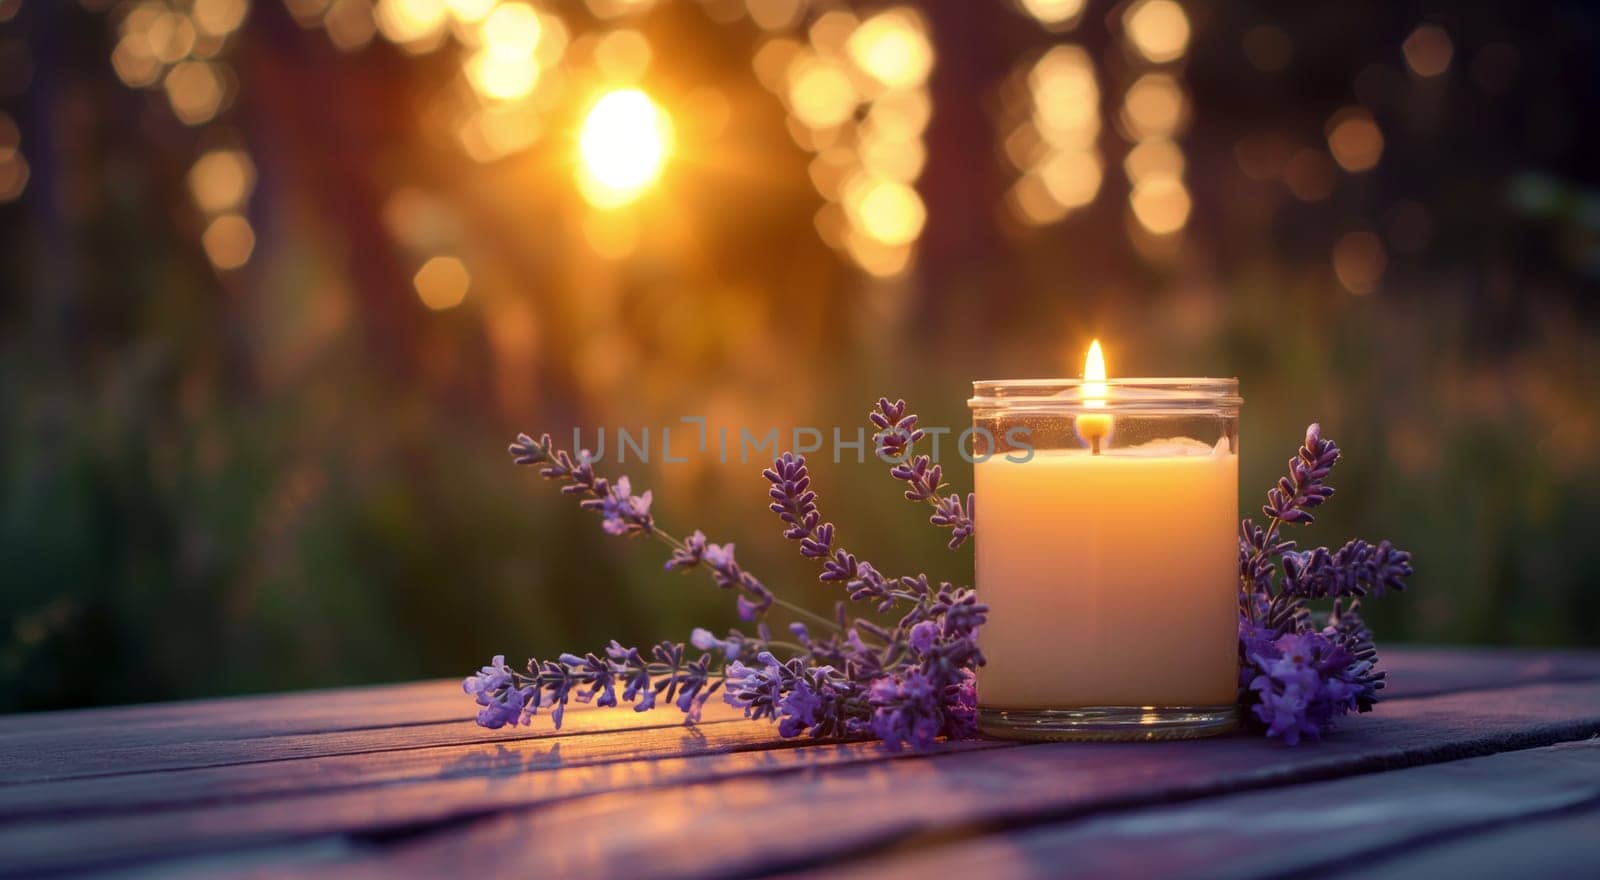 Lit candle with lavender on a wooden surface during a serene sunset. by kizuneko